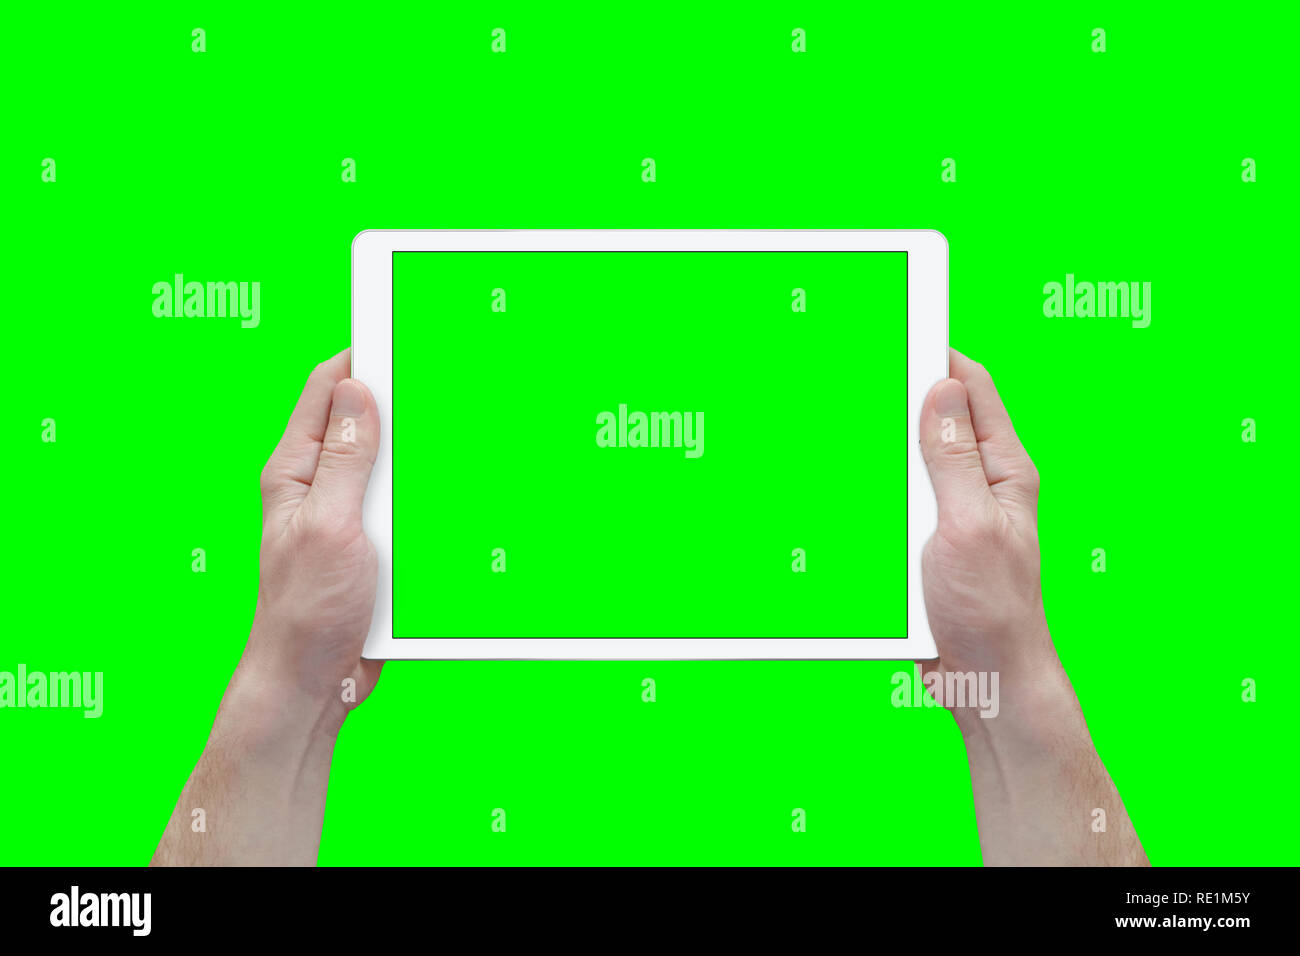 Hands hold white tablet in a horizontal position. View from first person. Isolated screen and background in green. Stock Photo